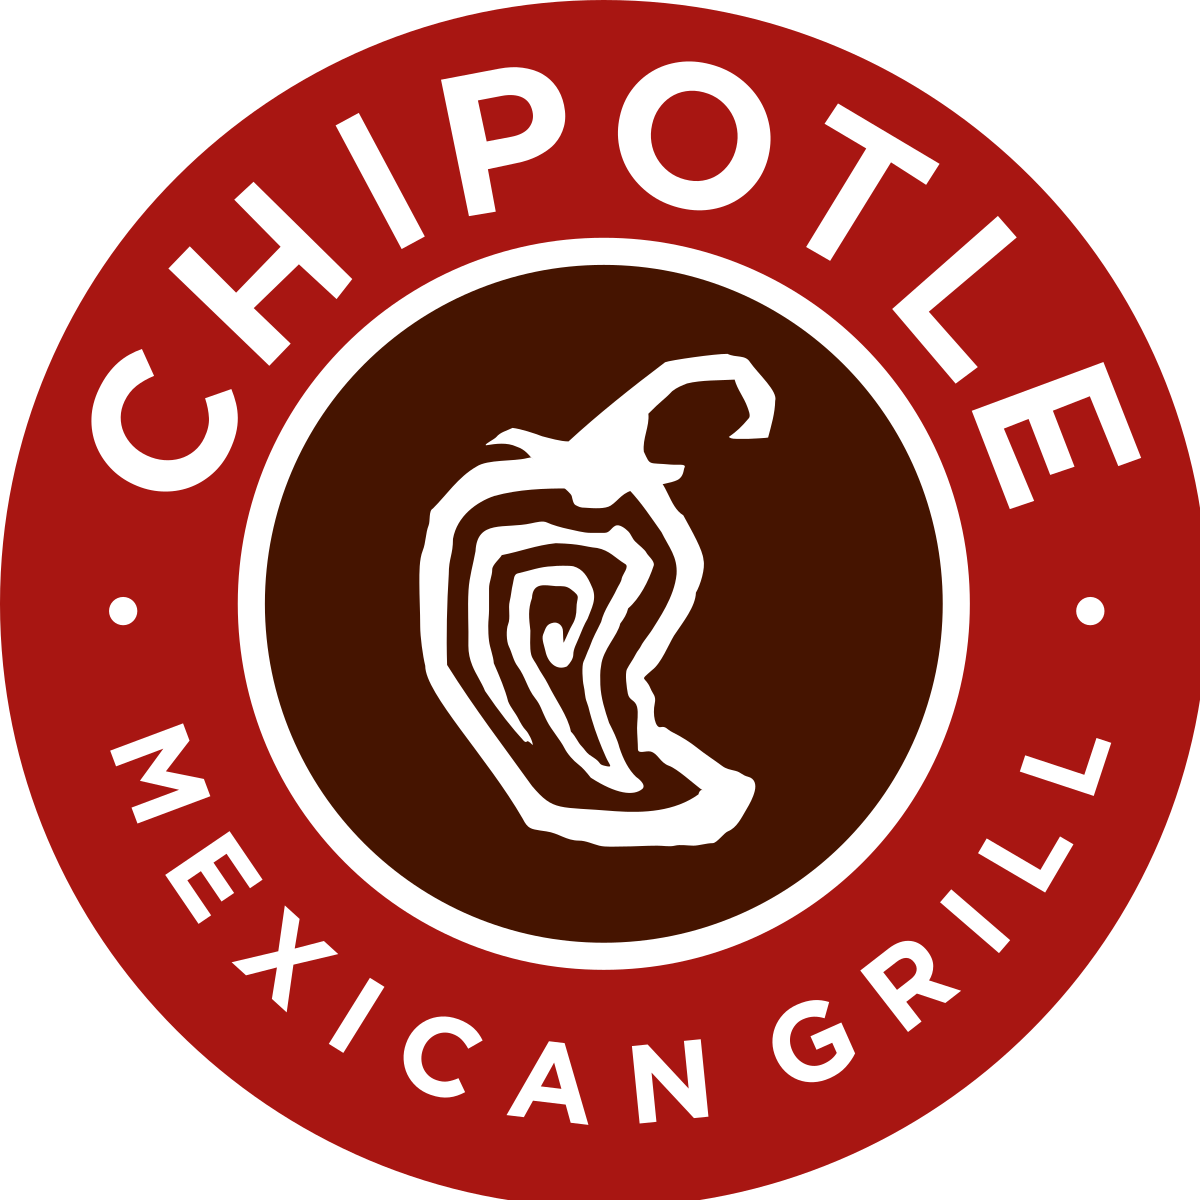 Chipotle_Mexican_Grill_logo.svg.png